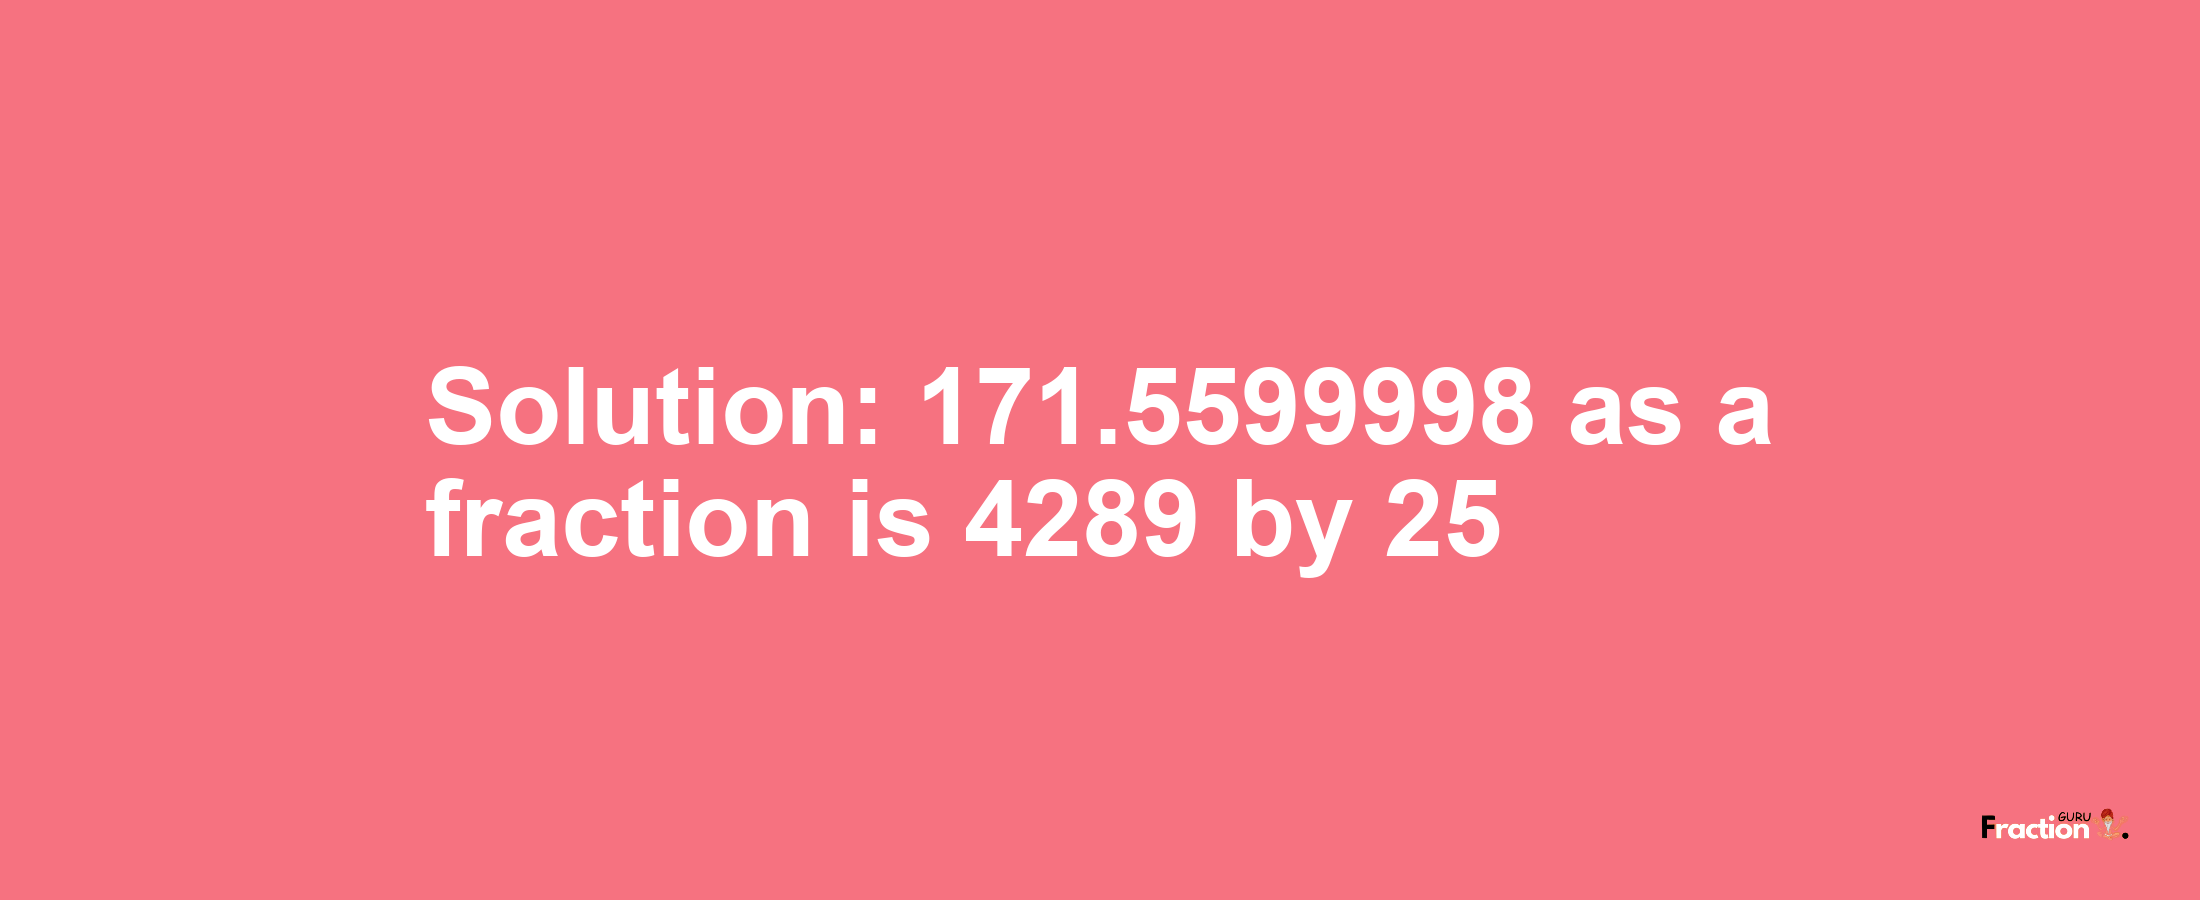 Solution:171.5599998 as a fraction is 4289/25